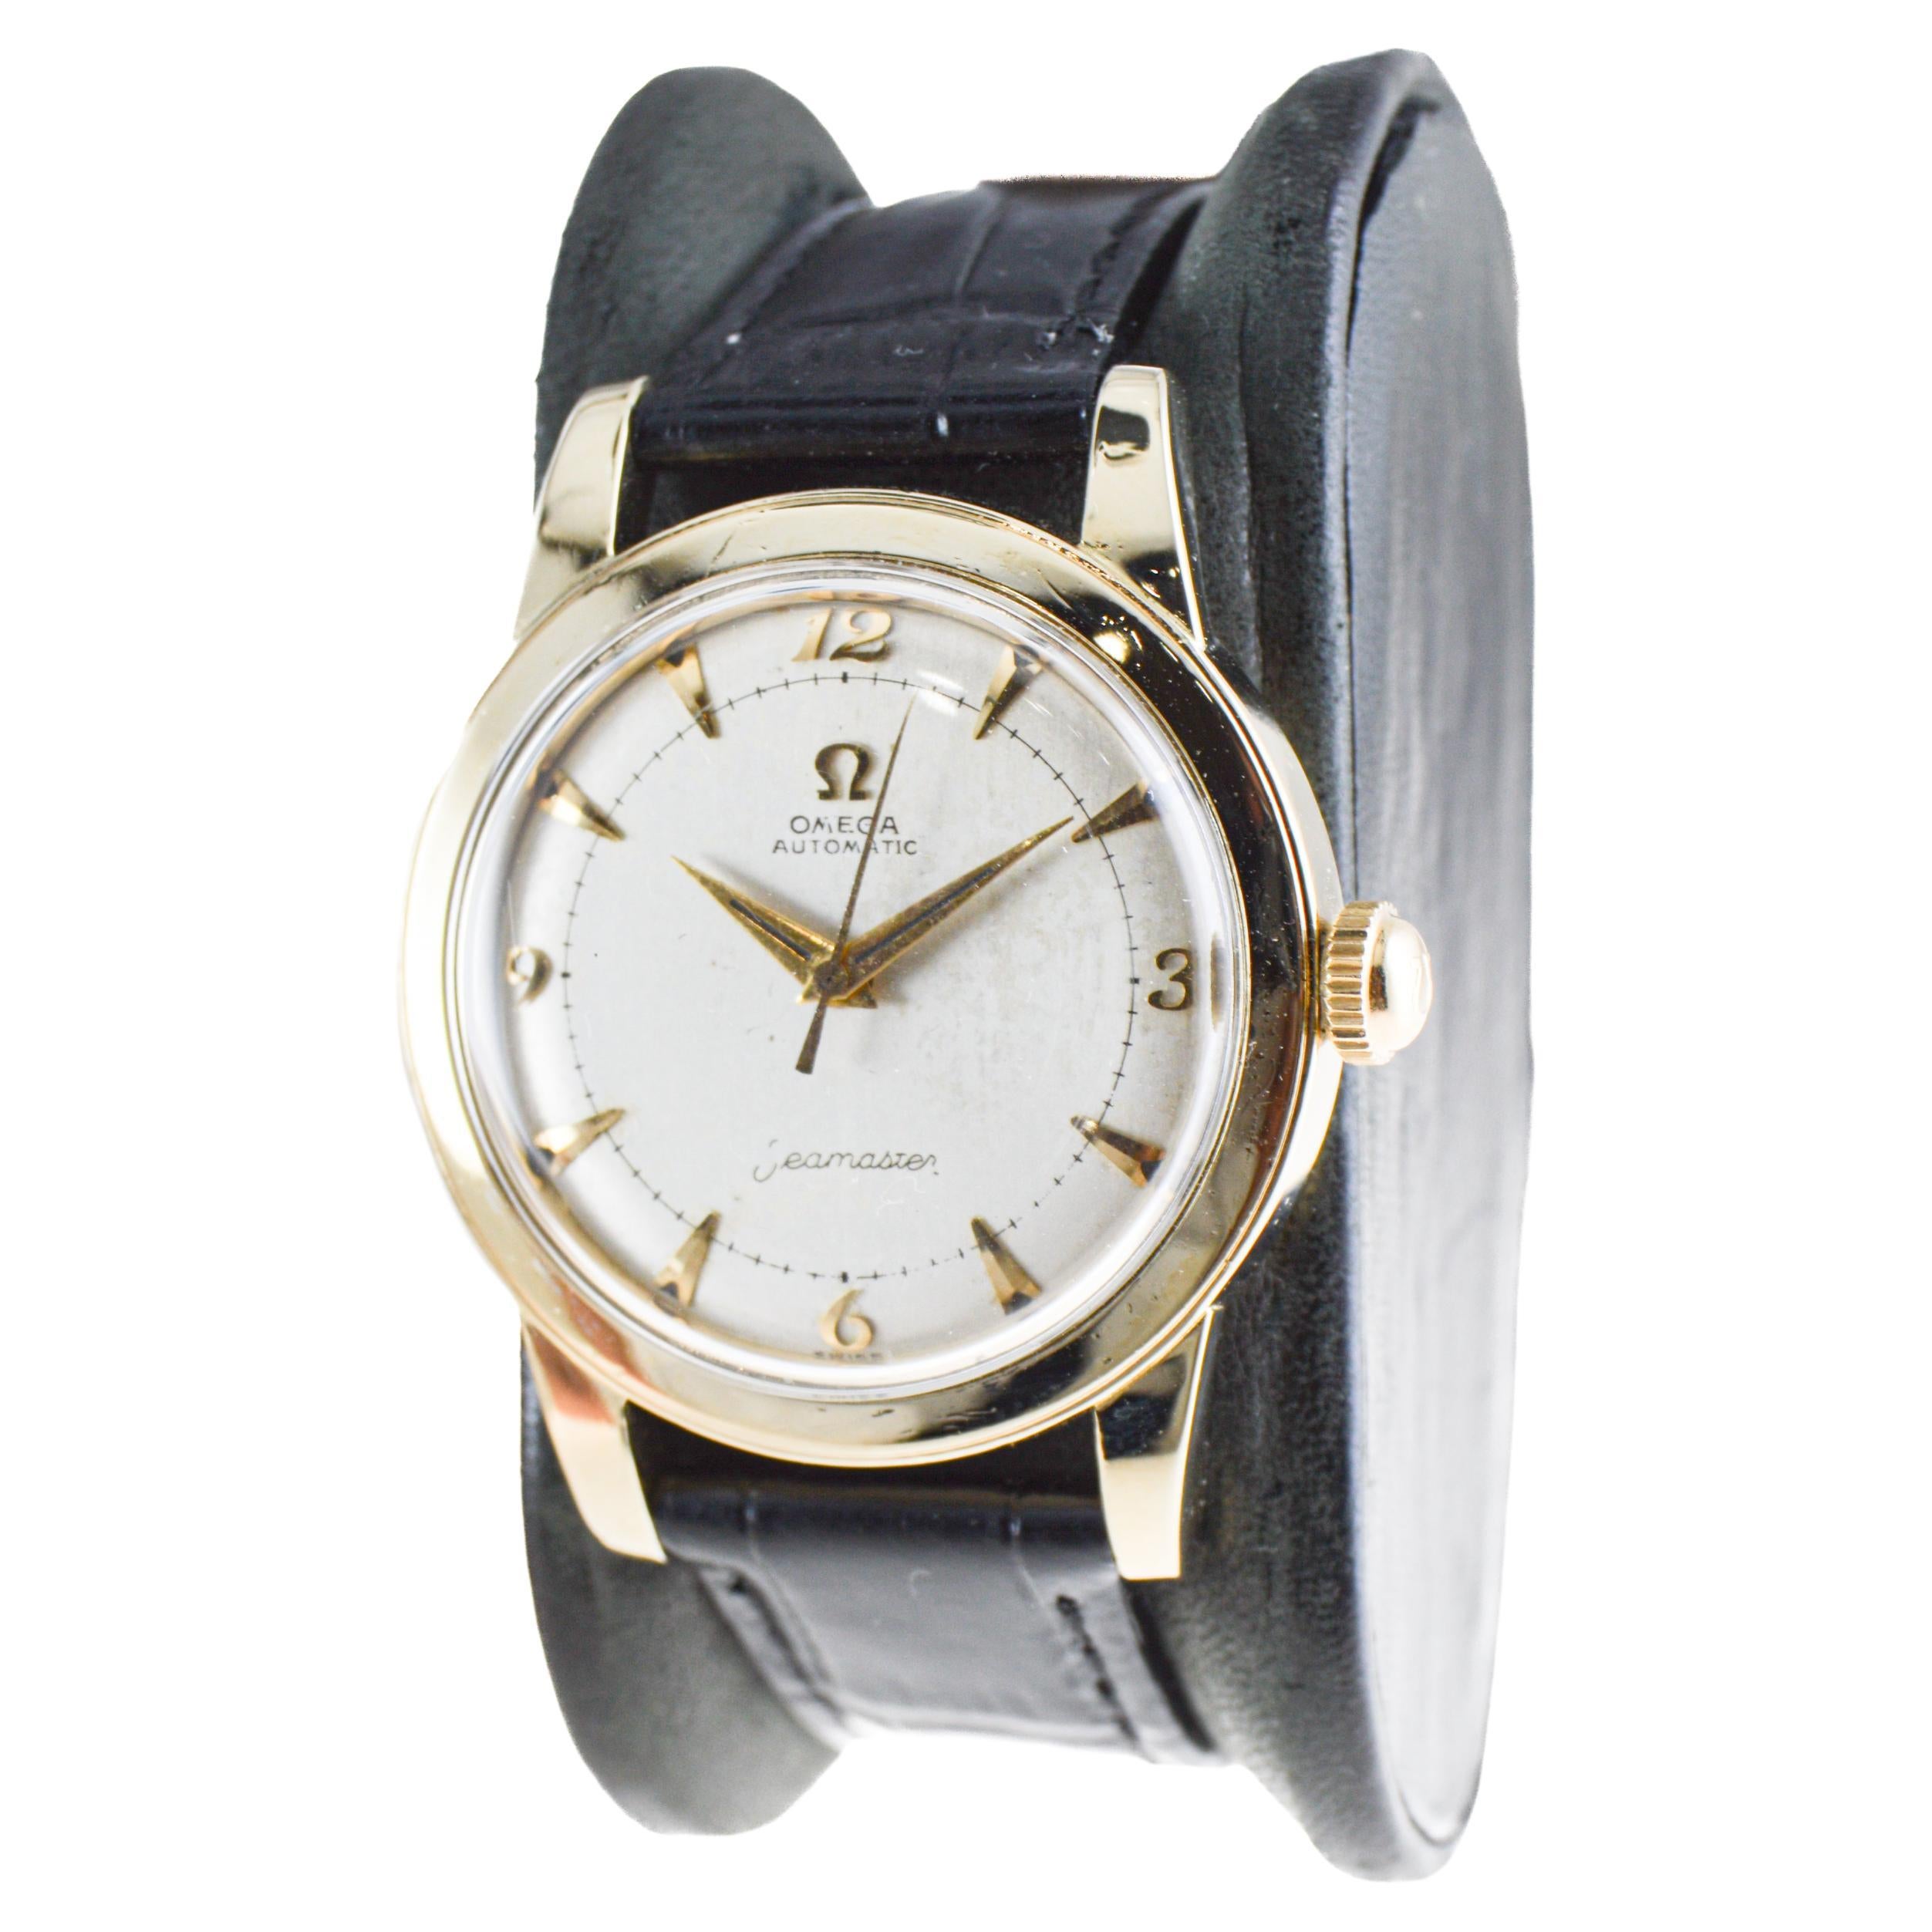 Art Deco Omega Yellow Gold Filled Mid Century Modenrist Design with Original Factory Dial